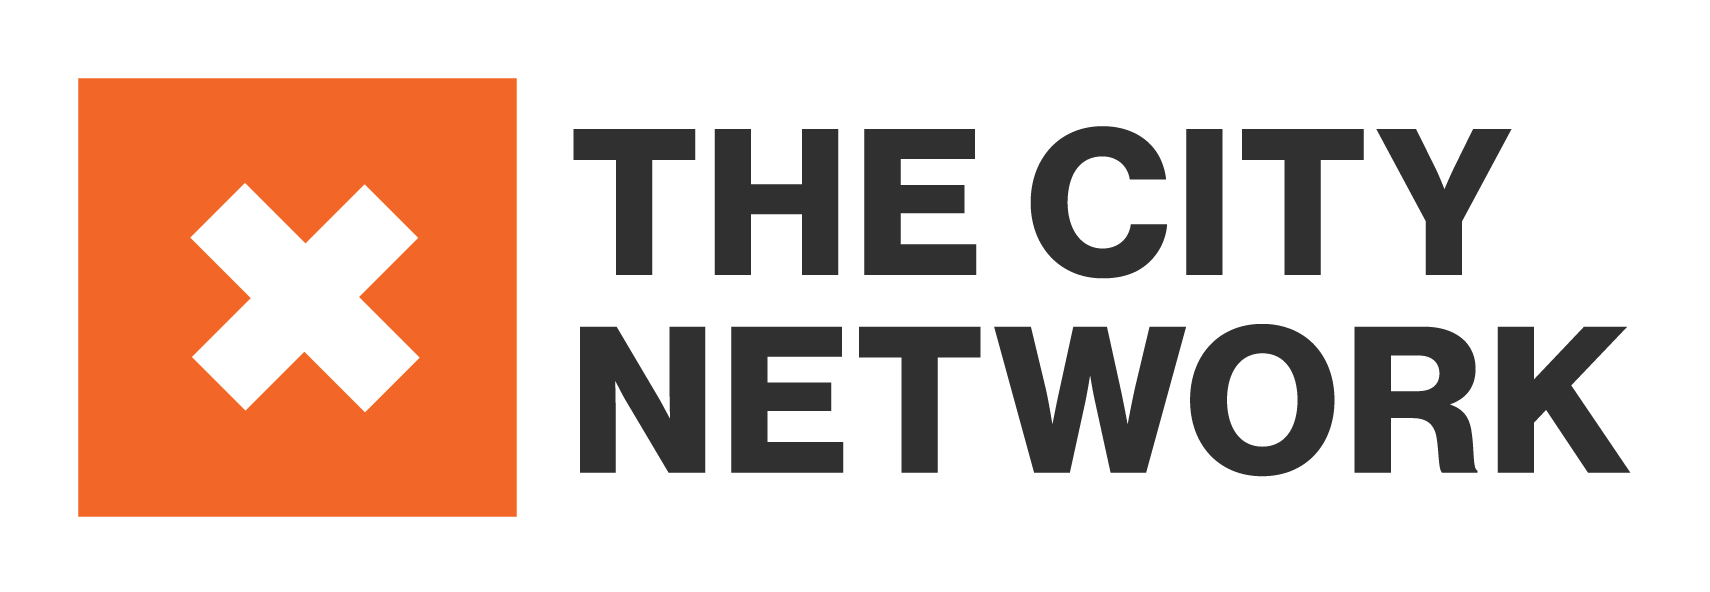 A logo for the city network with an orange square and a white cross.